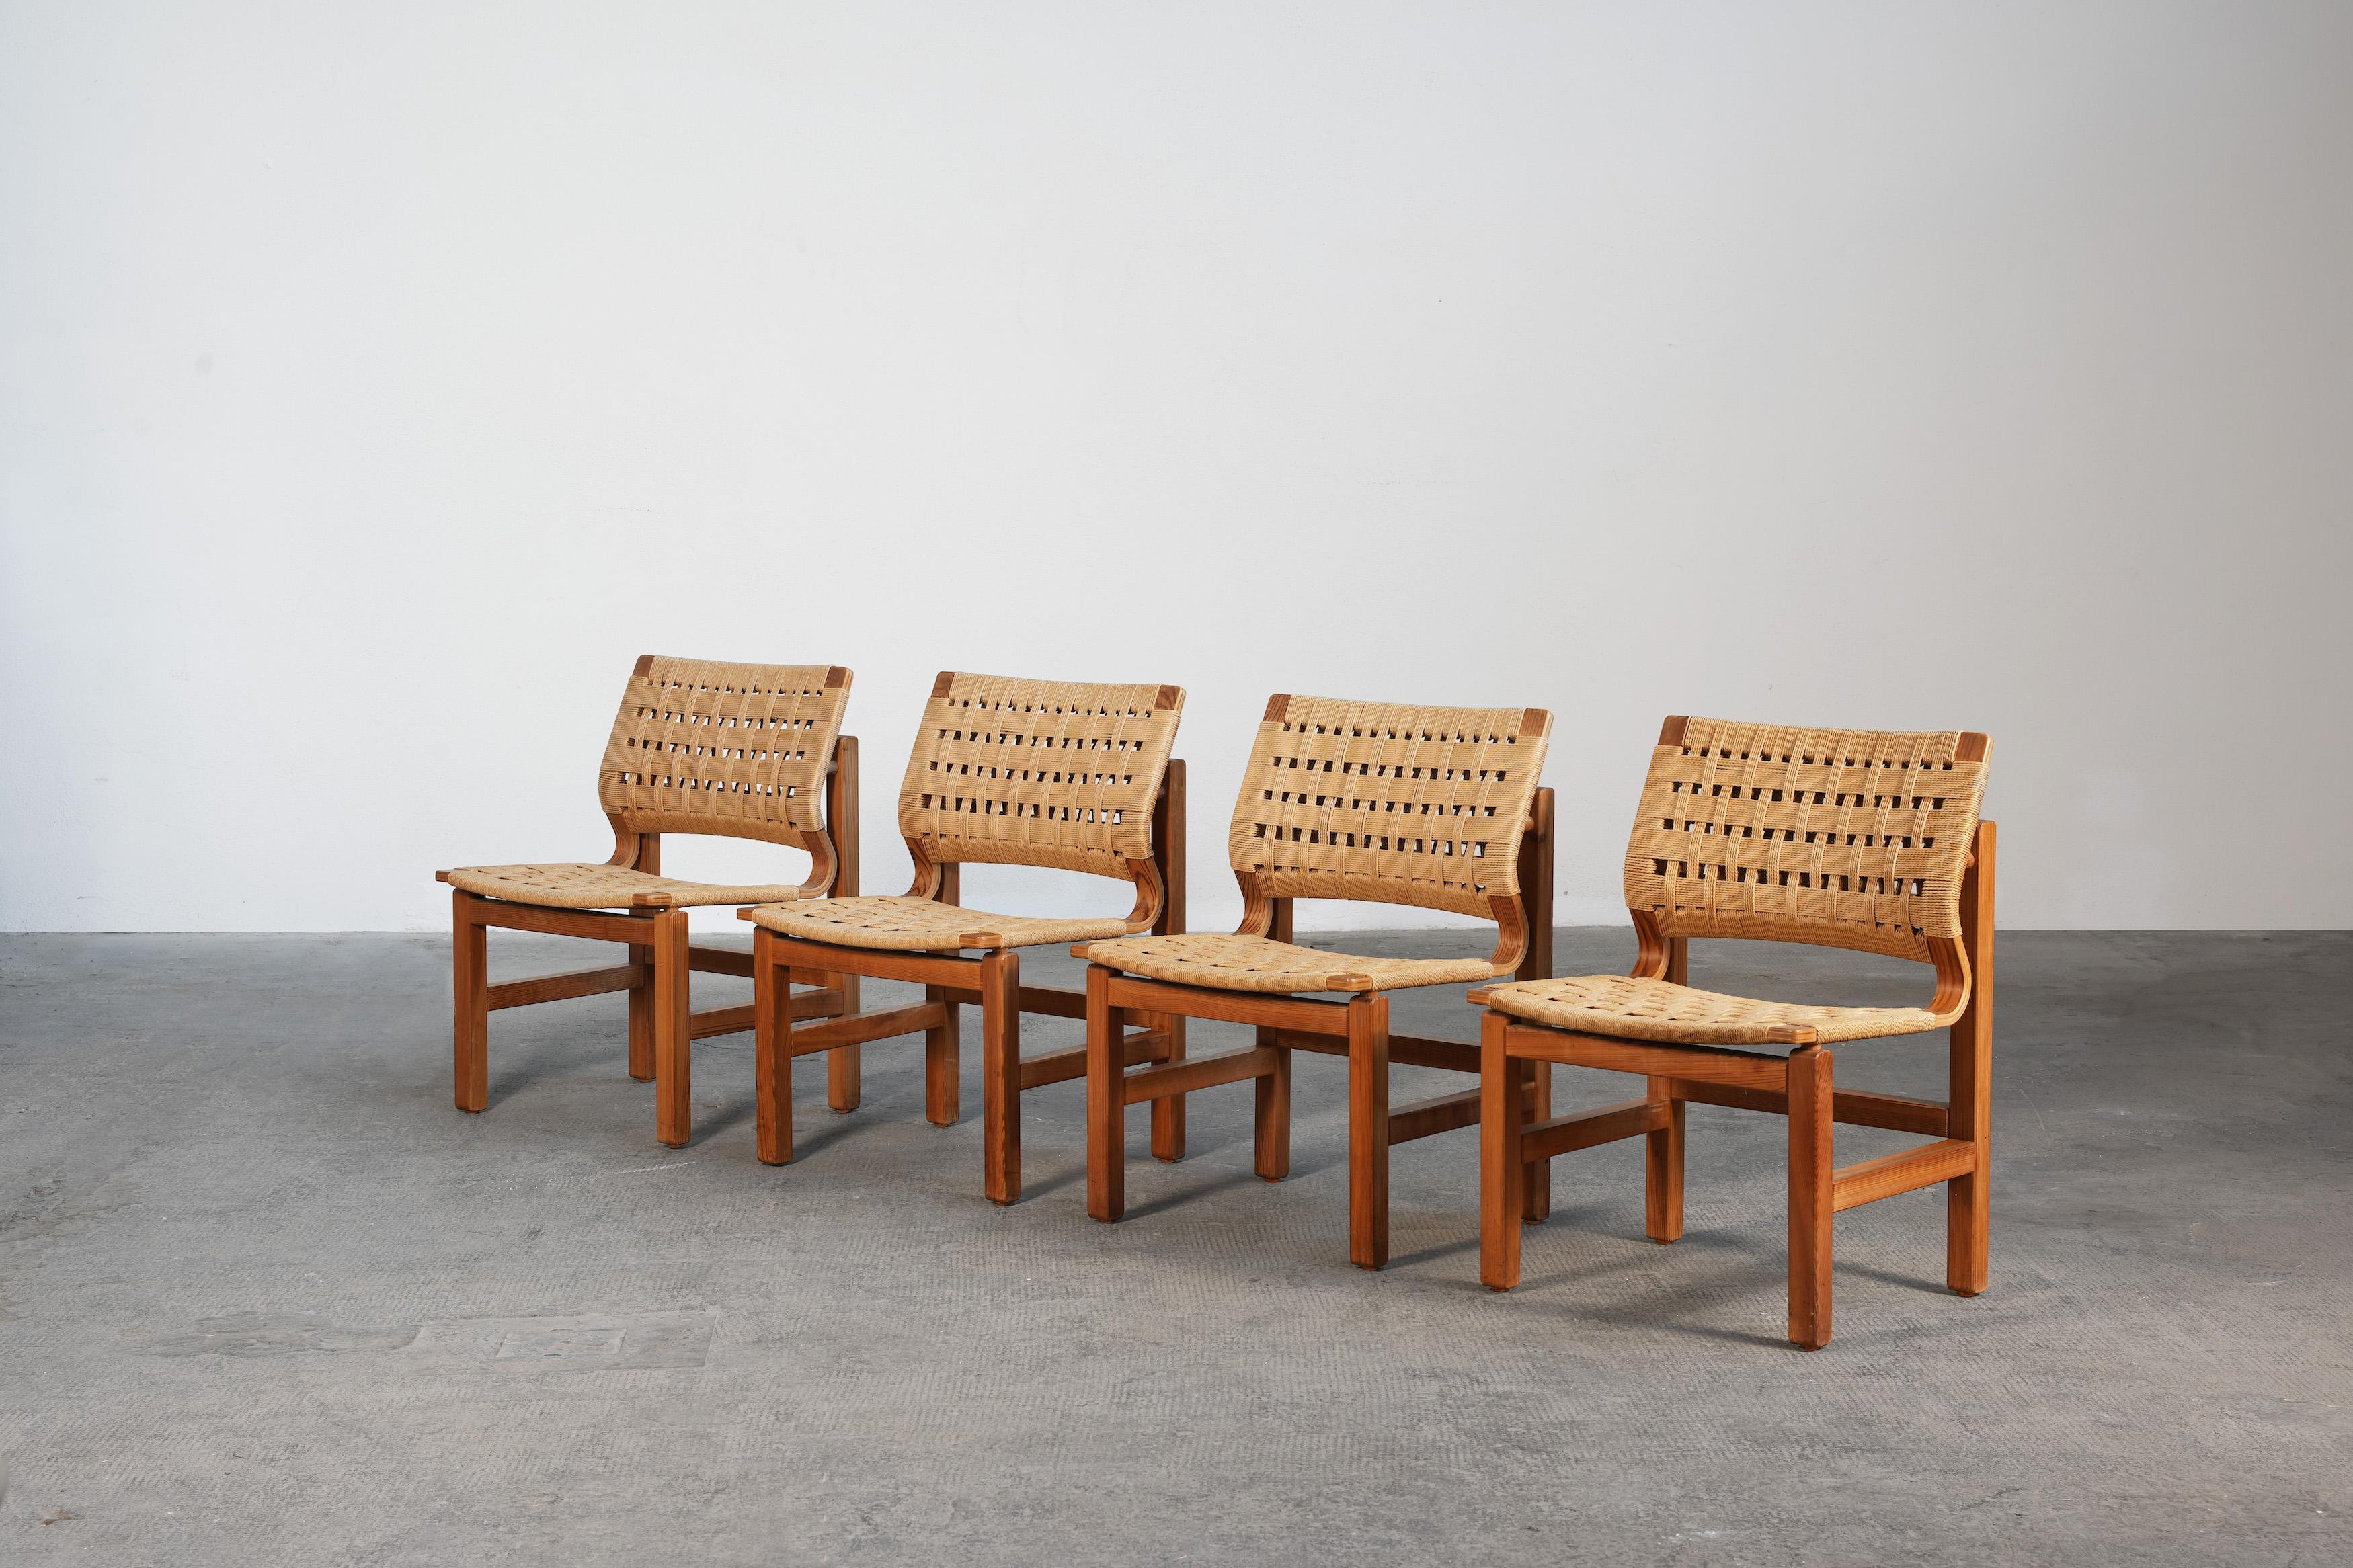 20th Century Rare Set of Four Danish Pine Chairs by Vagn Fuglsang, Denmark 1970ies